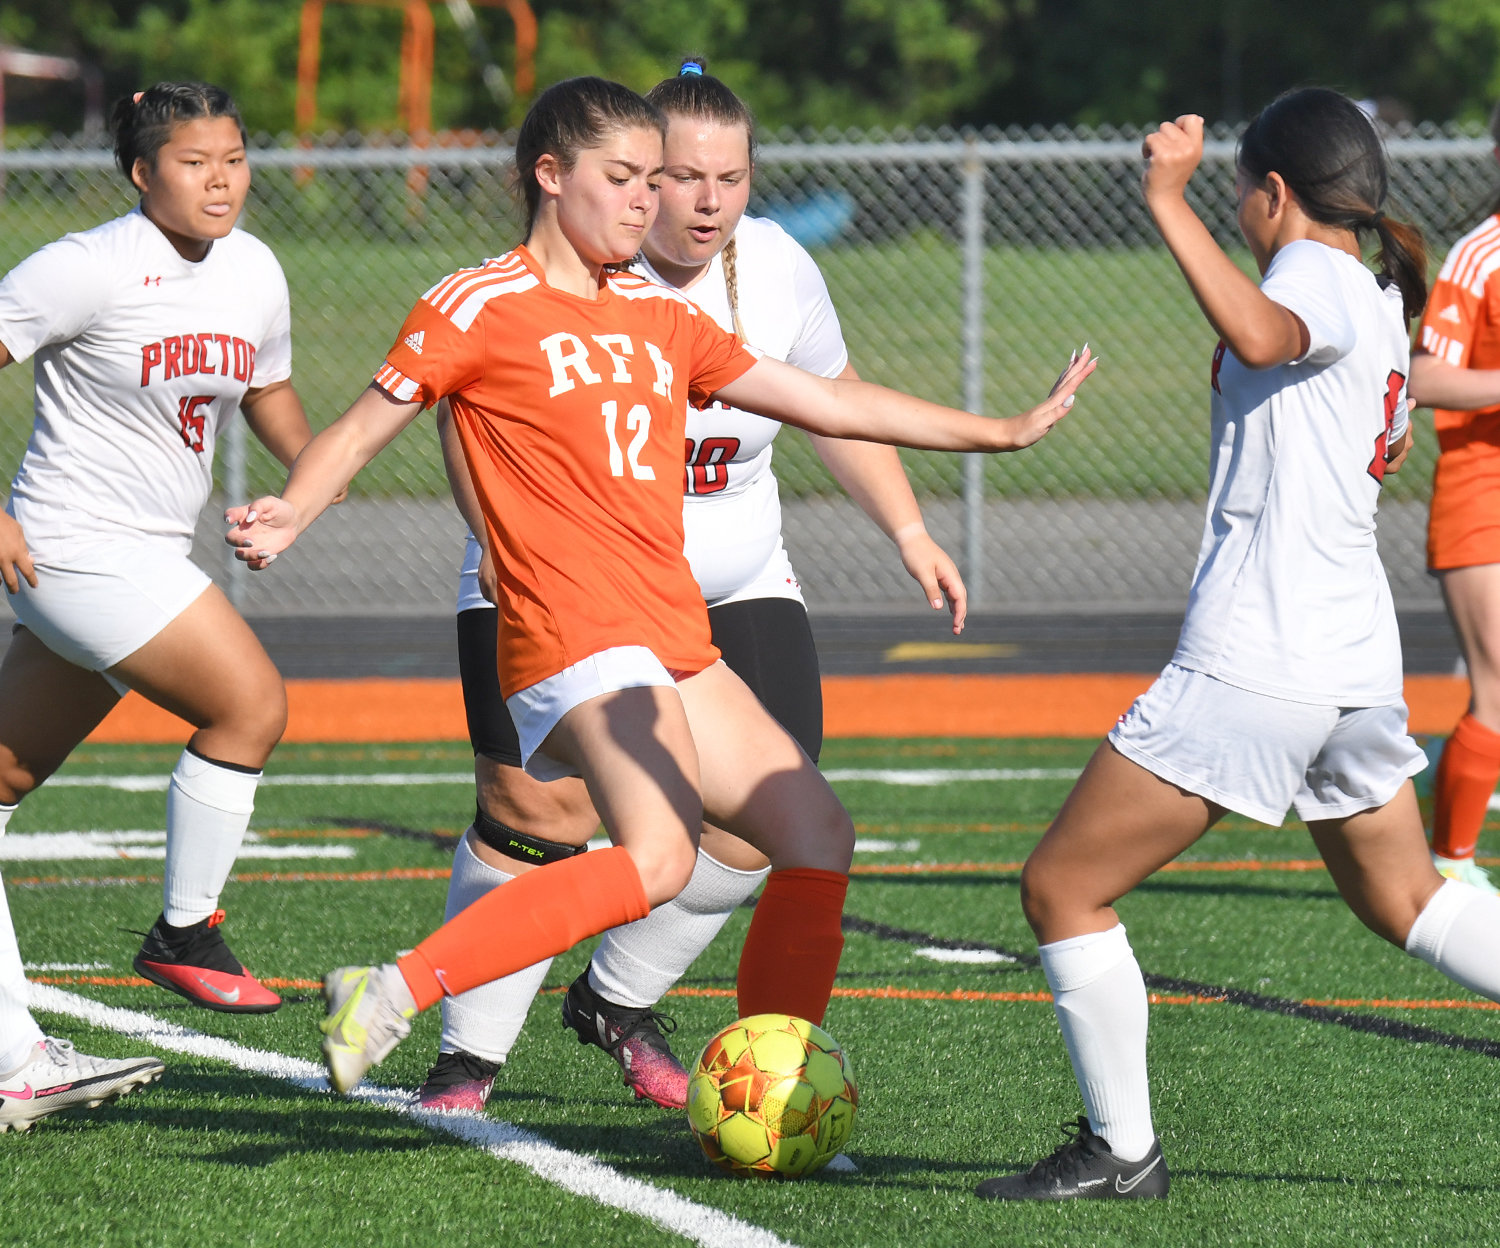 Brooke Frawley unleashes a shot to score the second goal for Rome Free Academy against Utica Proctor Thursday at home. Surrounding her, from left, are Hser Eh Ler Paw, Nadina Gacic and Kimani Thomas. Frawley also had an assist in the team’s 10-0 win.